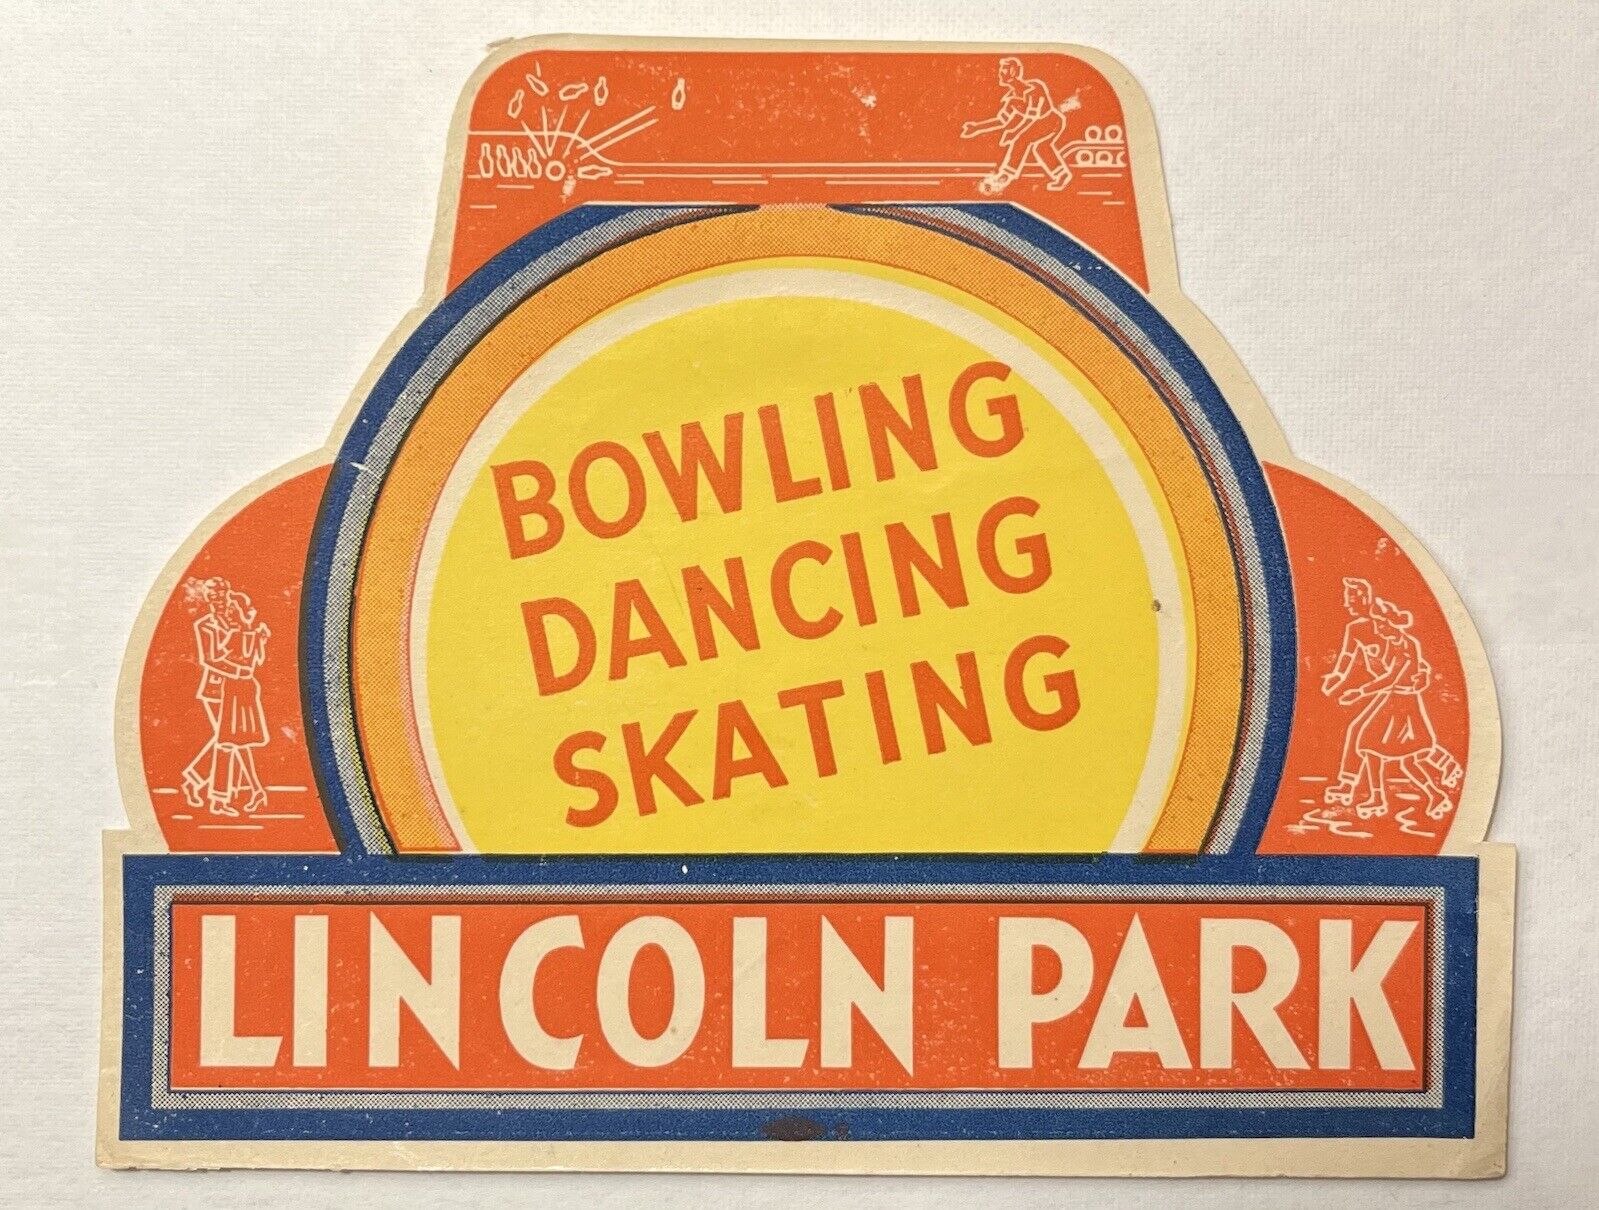 VINTAGE 1940’s LINCOLN PARK DARTMOUTH MA BOWLING DANCING ROLLER SKATING DECAL